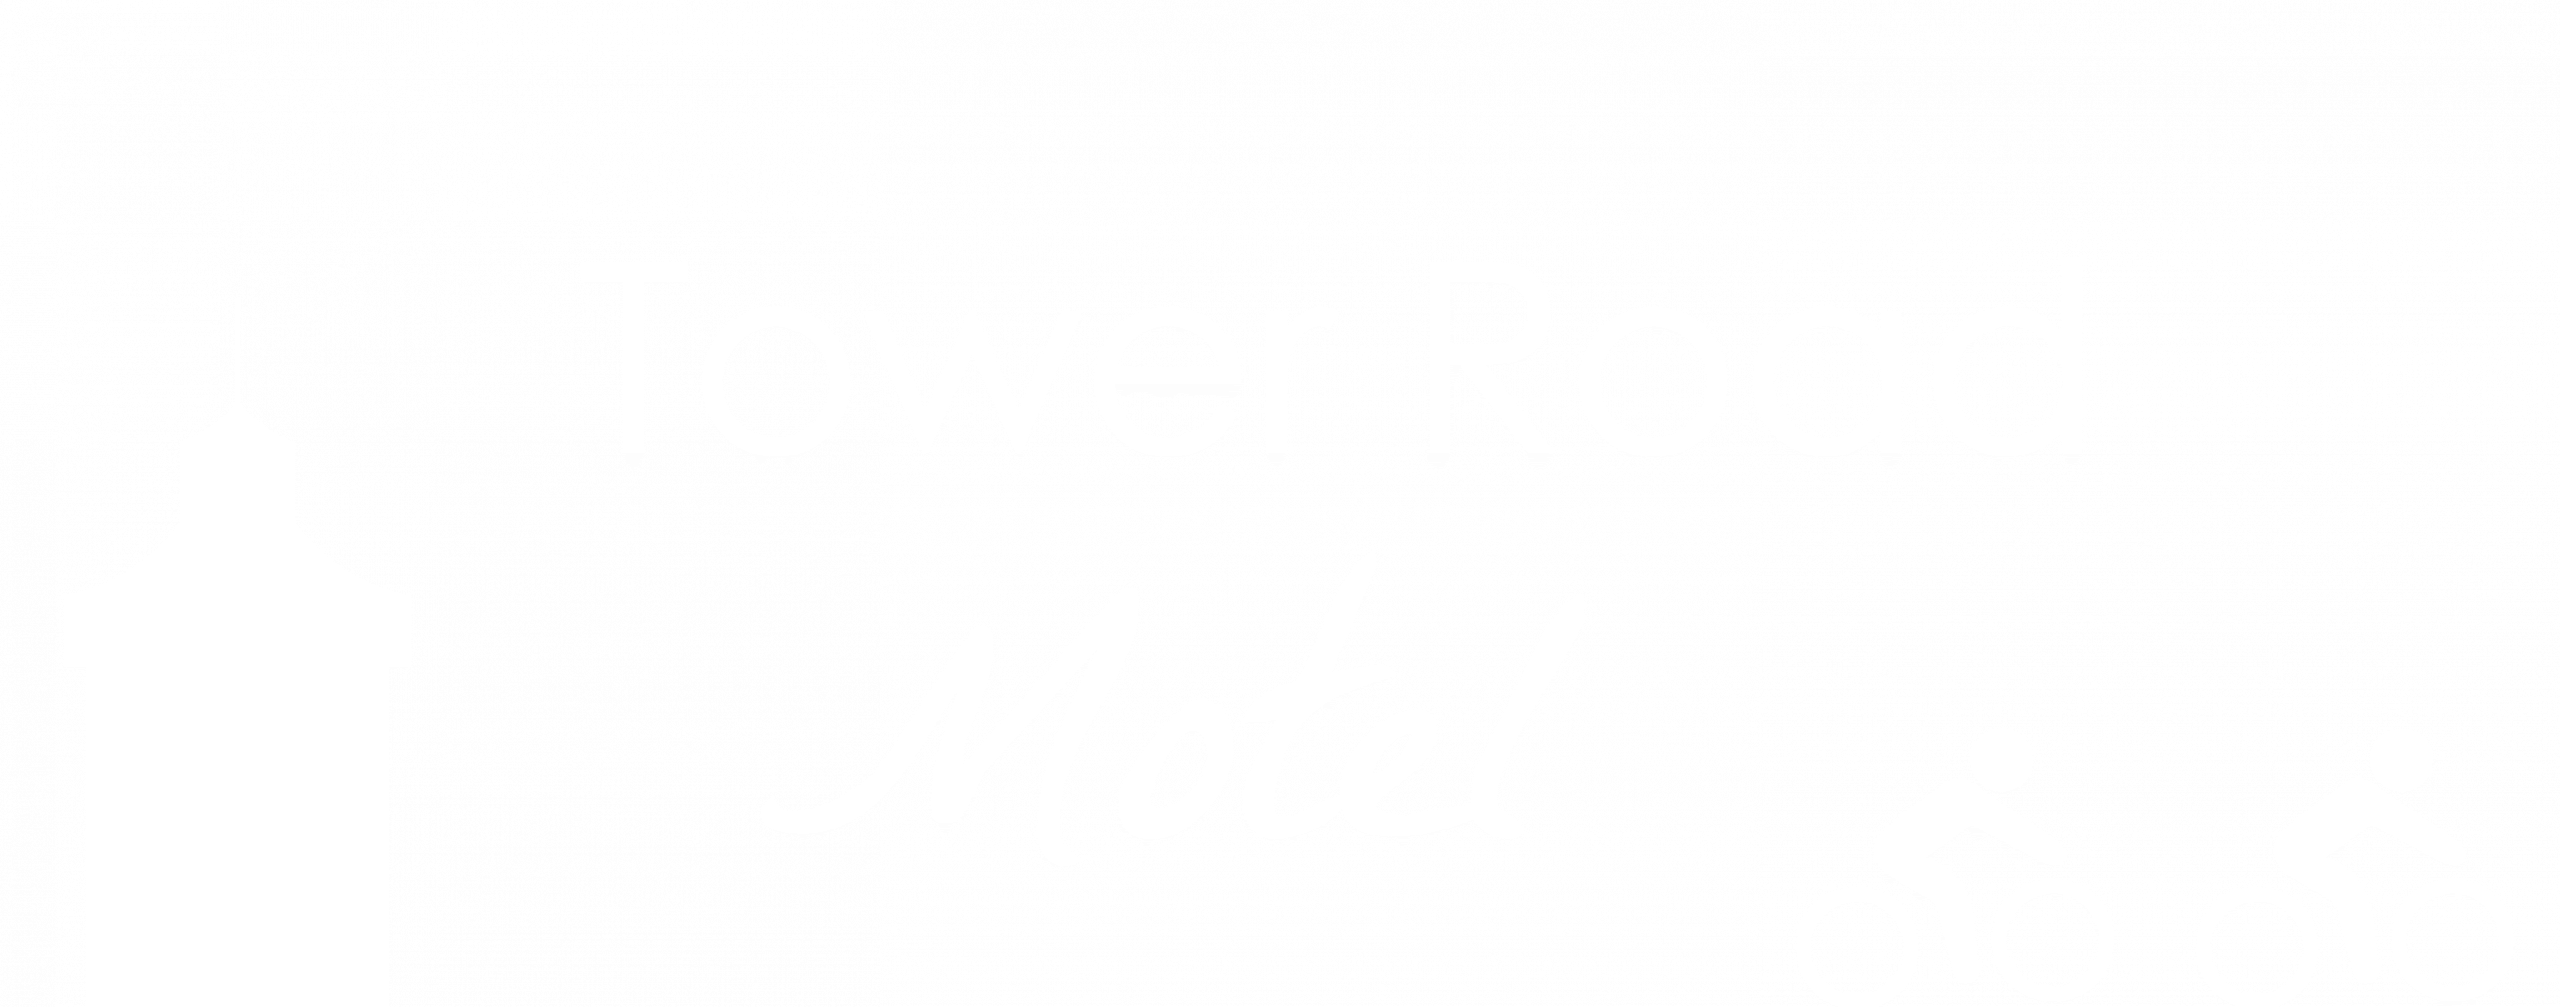 Tower Road Motel